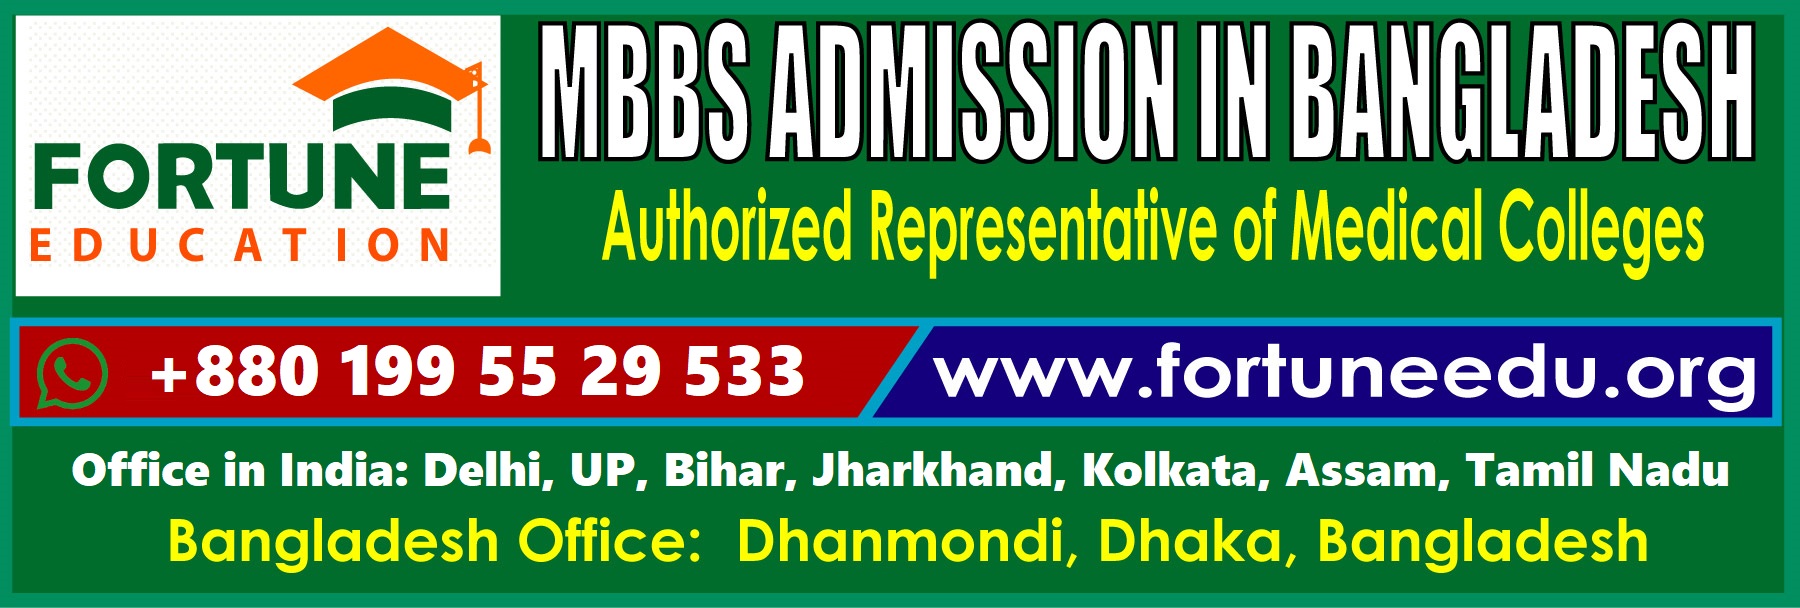 MBBS in Bangladesh Fees Eligibility MBBS Admission